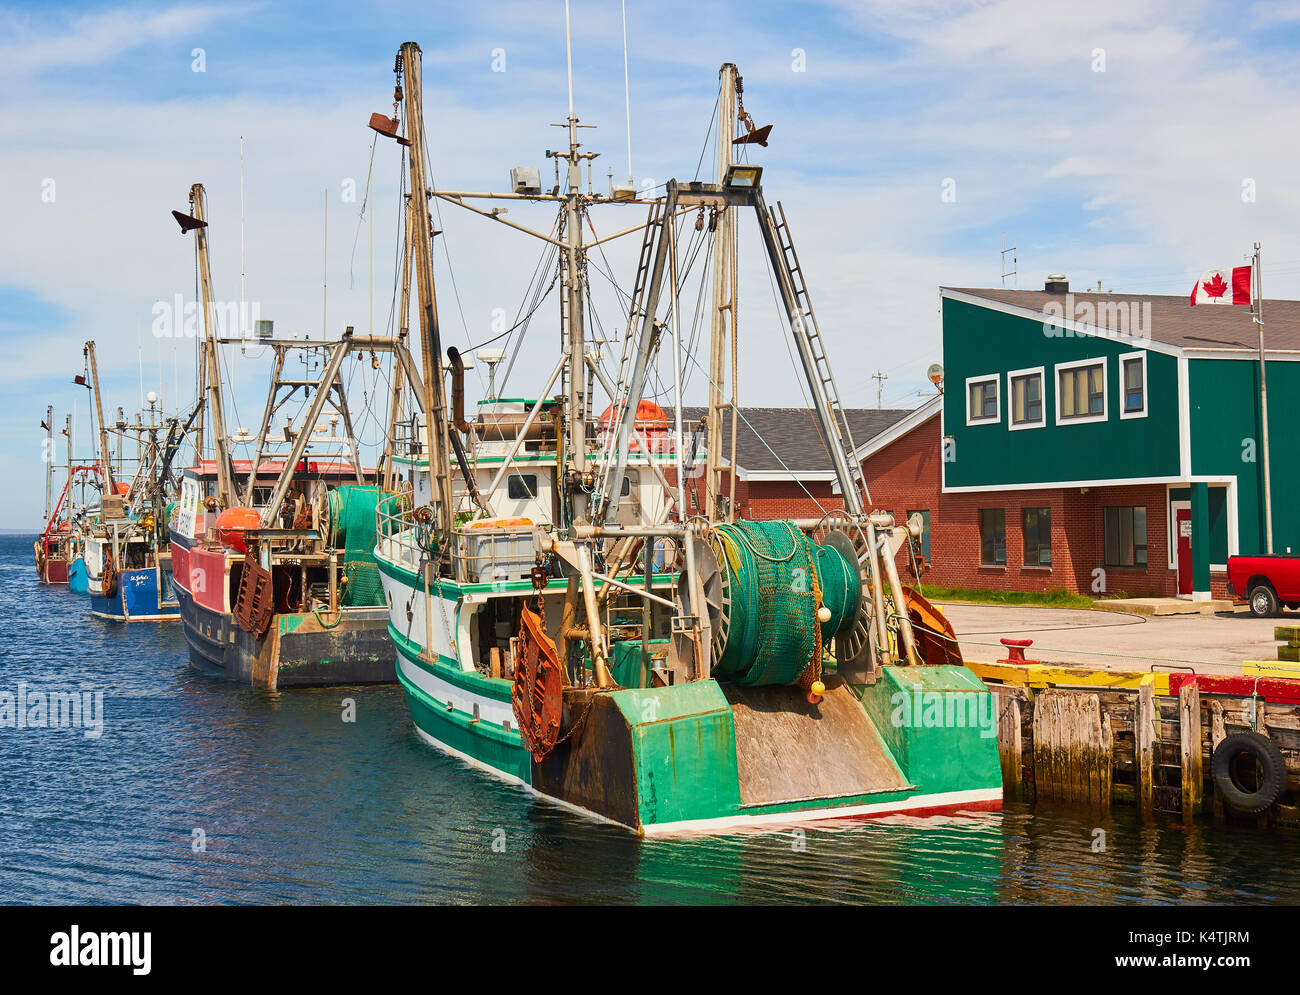 Fishing trawlers in the harbour at Port au Choix on the Gulf of St Lawrence, Western Newfoundland, Canada Stock Photo